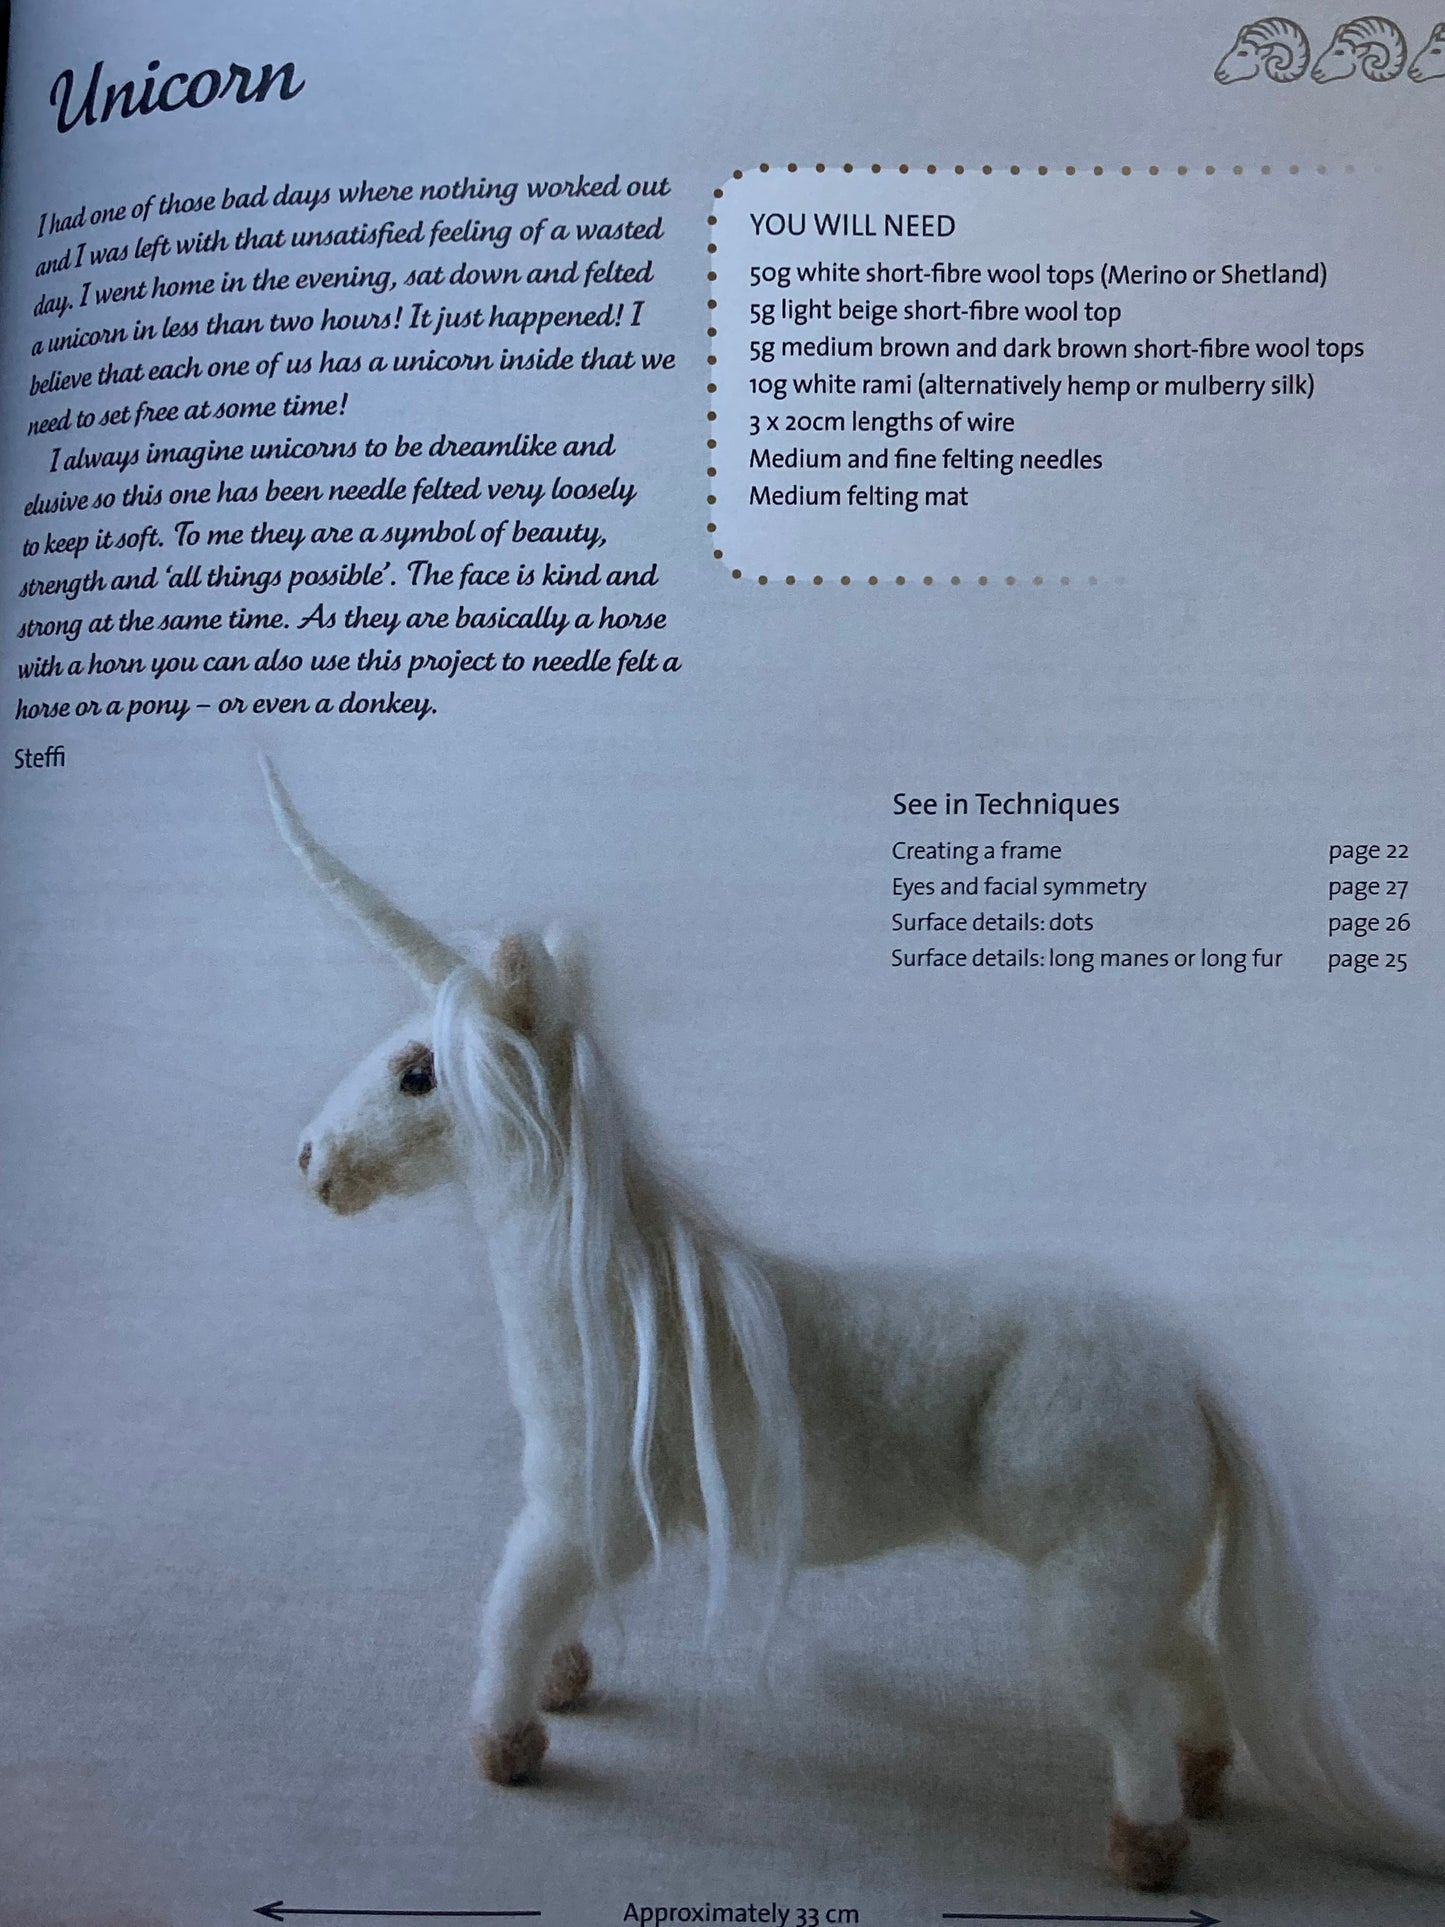 Crafting Resource Book - MAKING NEEDLE FELTED ANIMALS